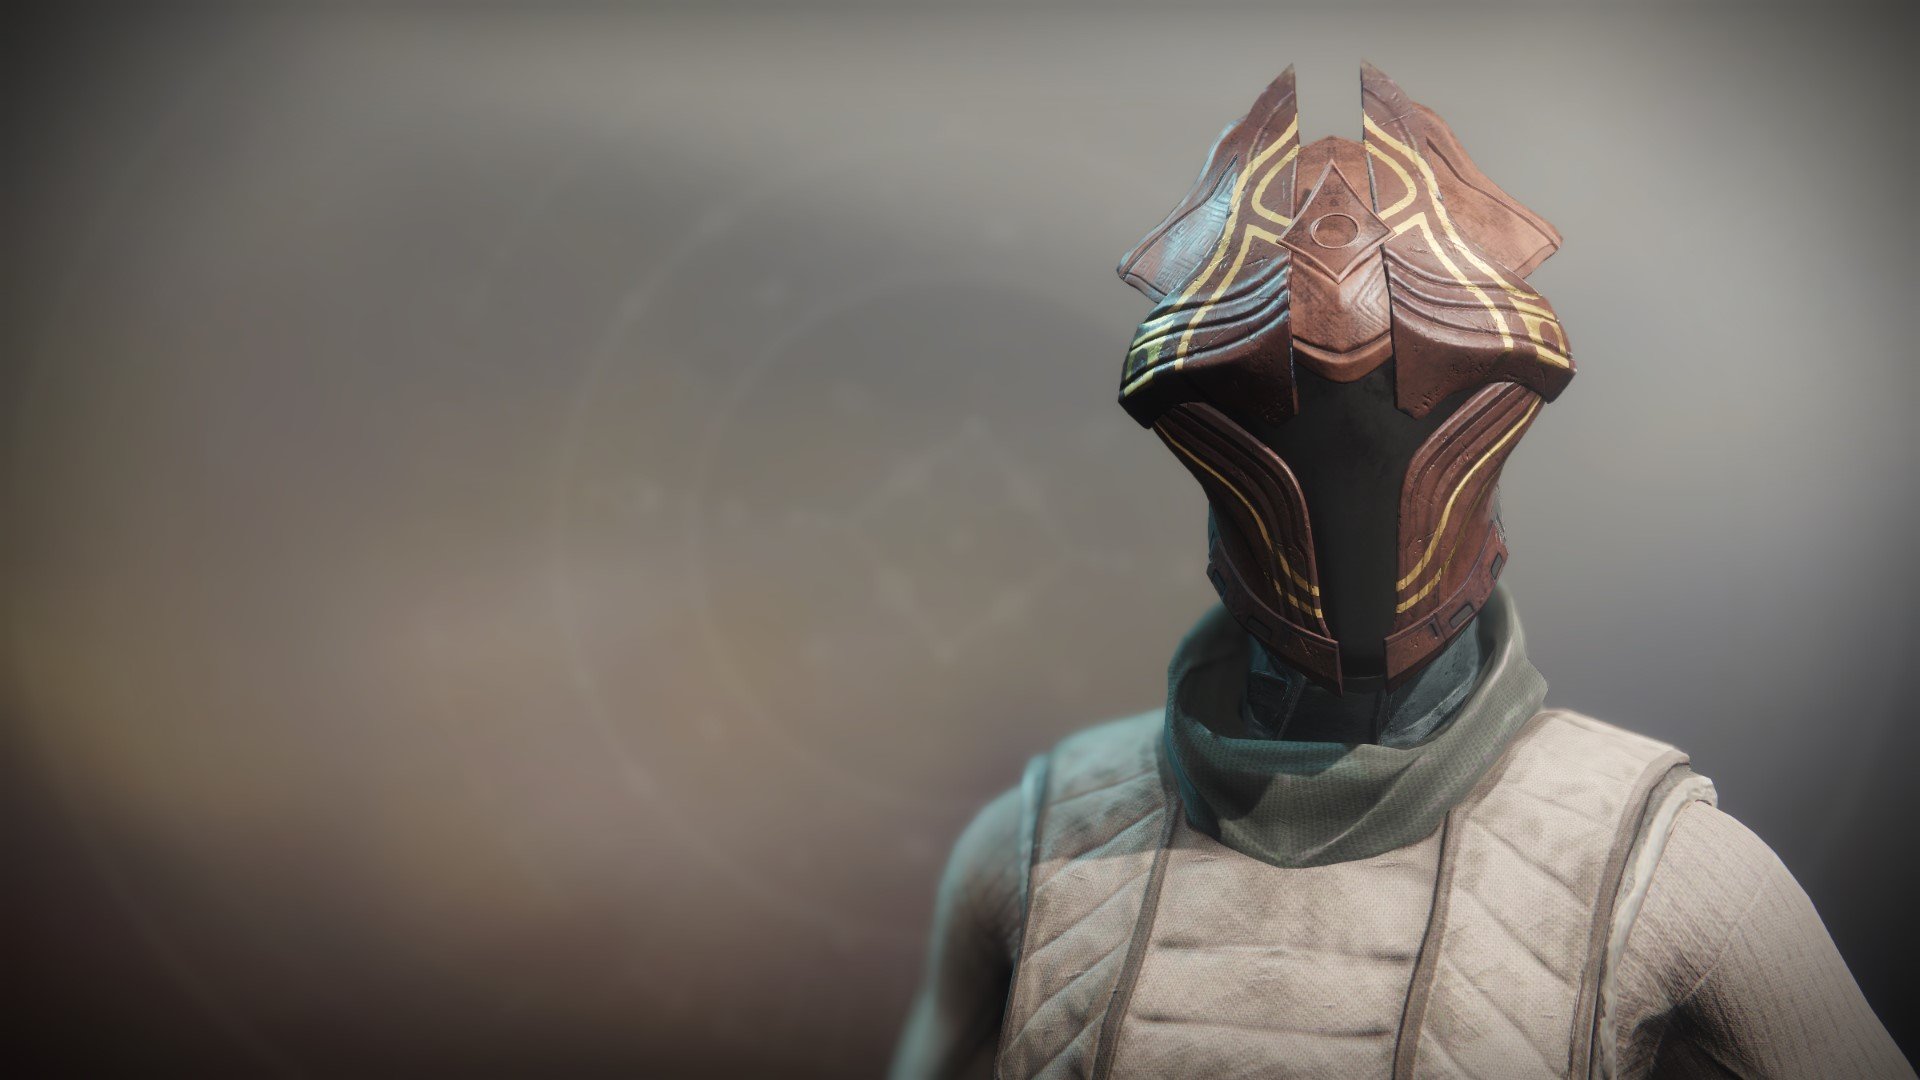 An in-game render of the Iron Fellowship Hood.